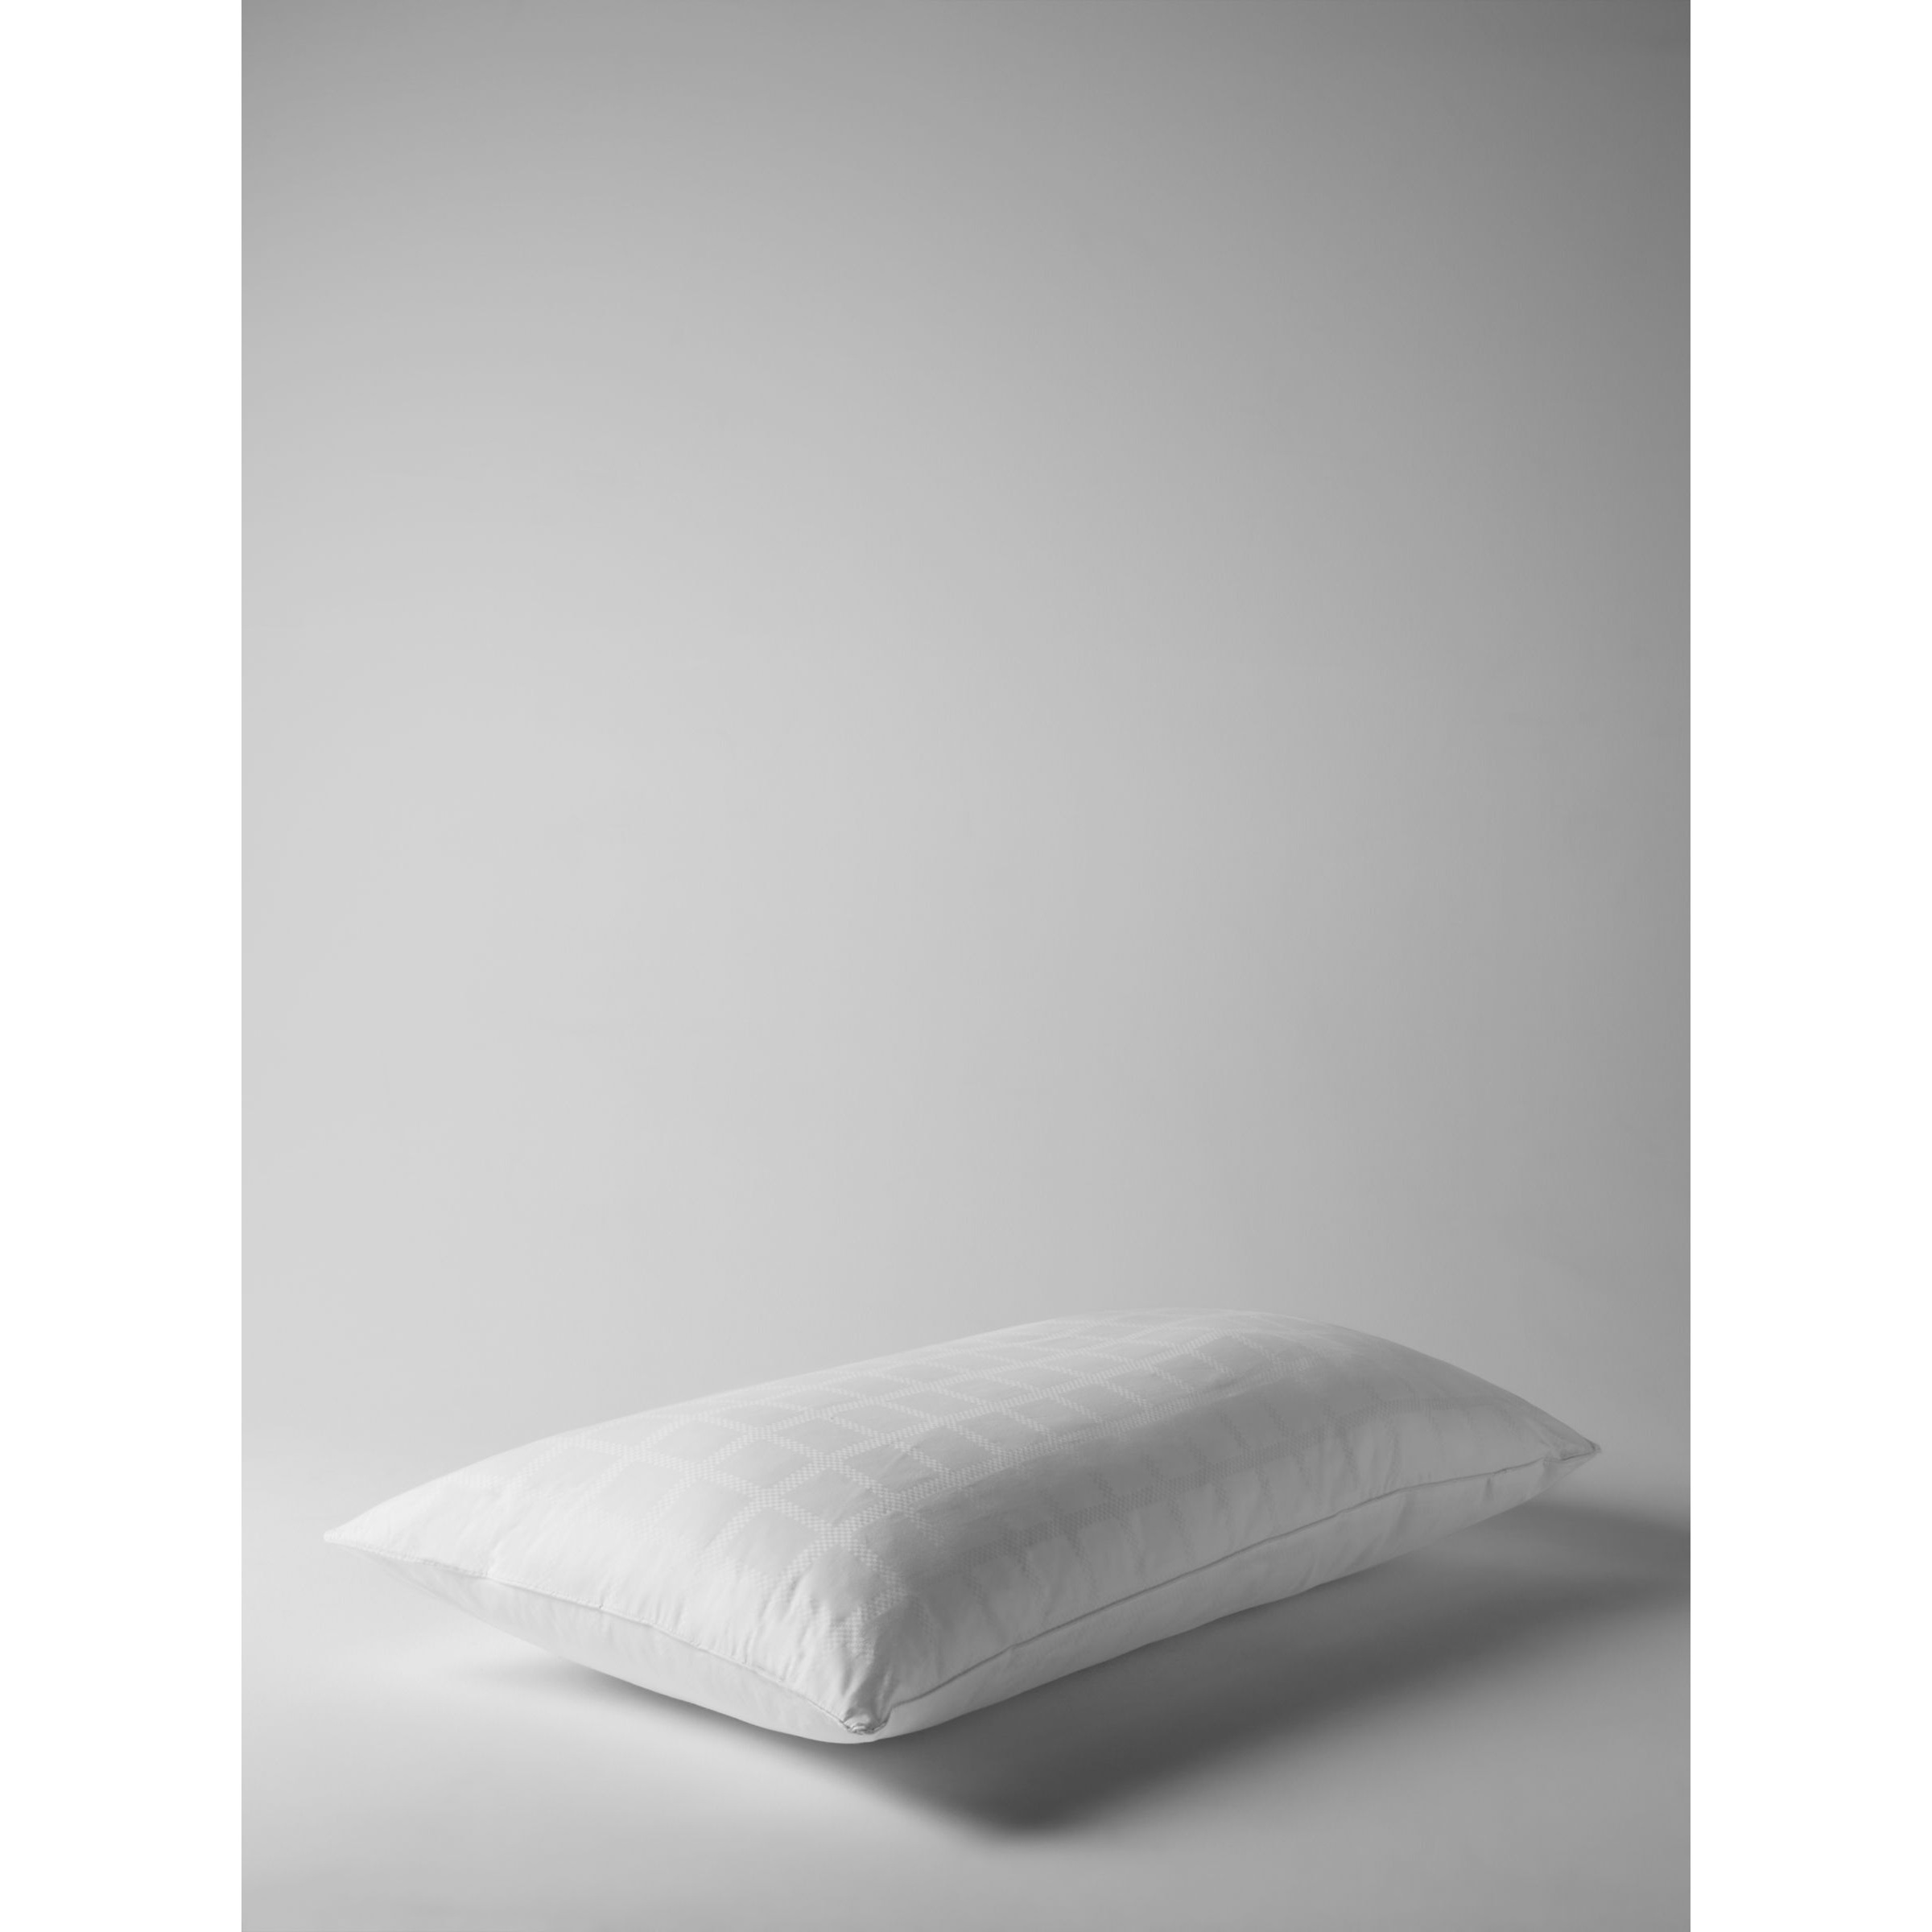 John Lewis Specialist Synthetic Active Anti-Allergy Kingsize Pillow with Plant-Based Treatment, Medium/Firm - image 1